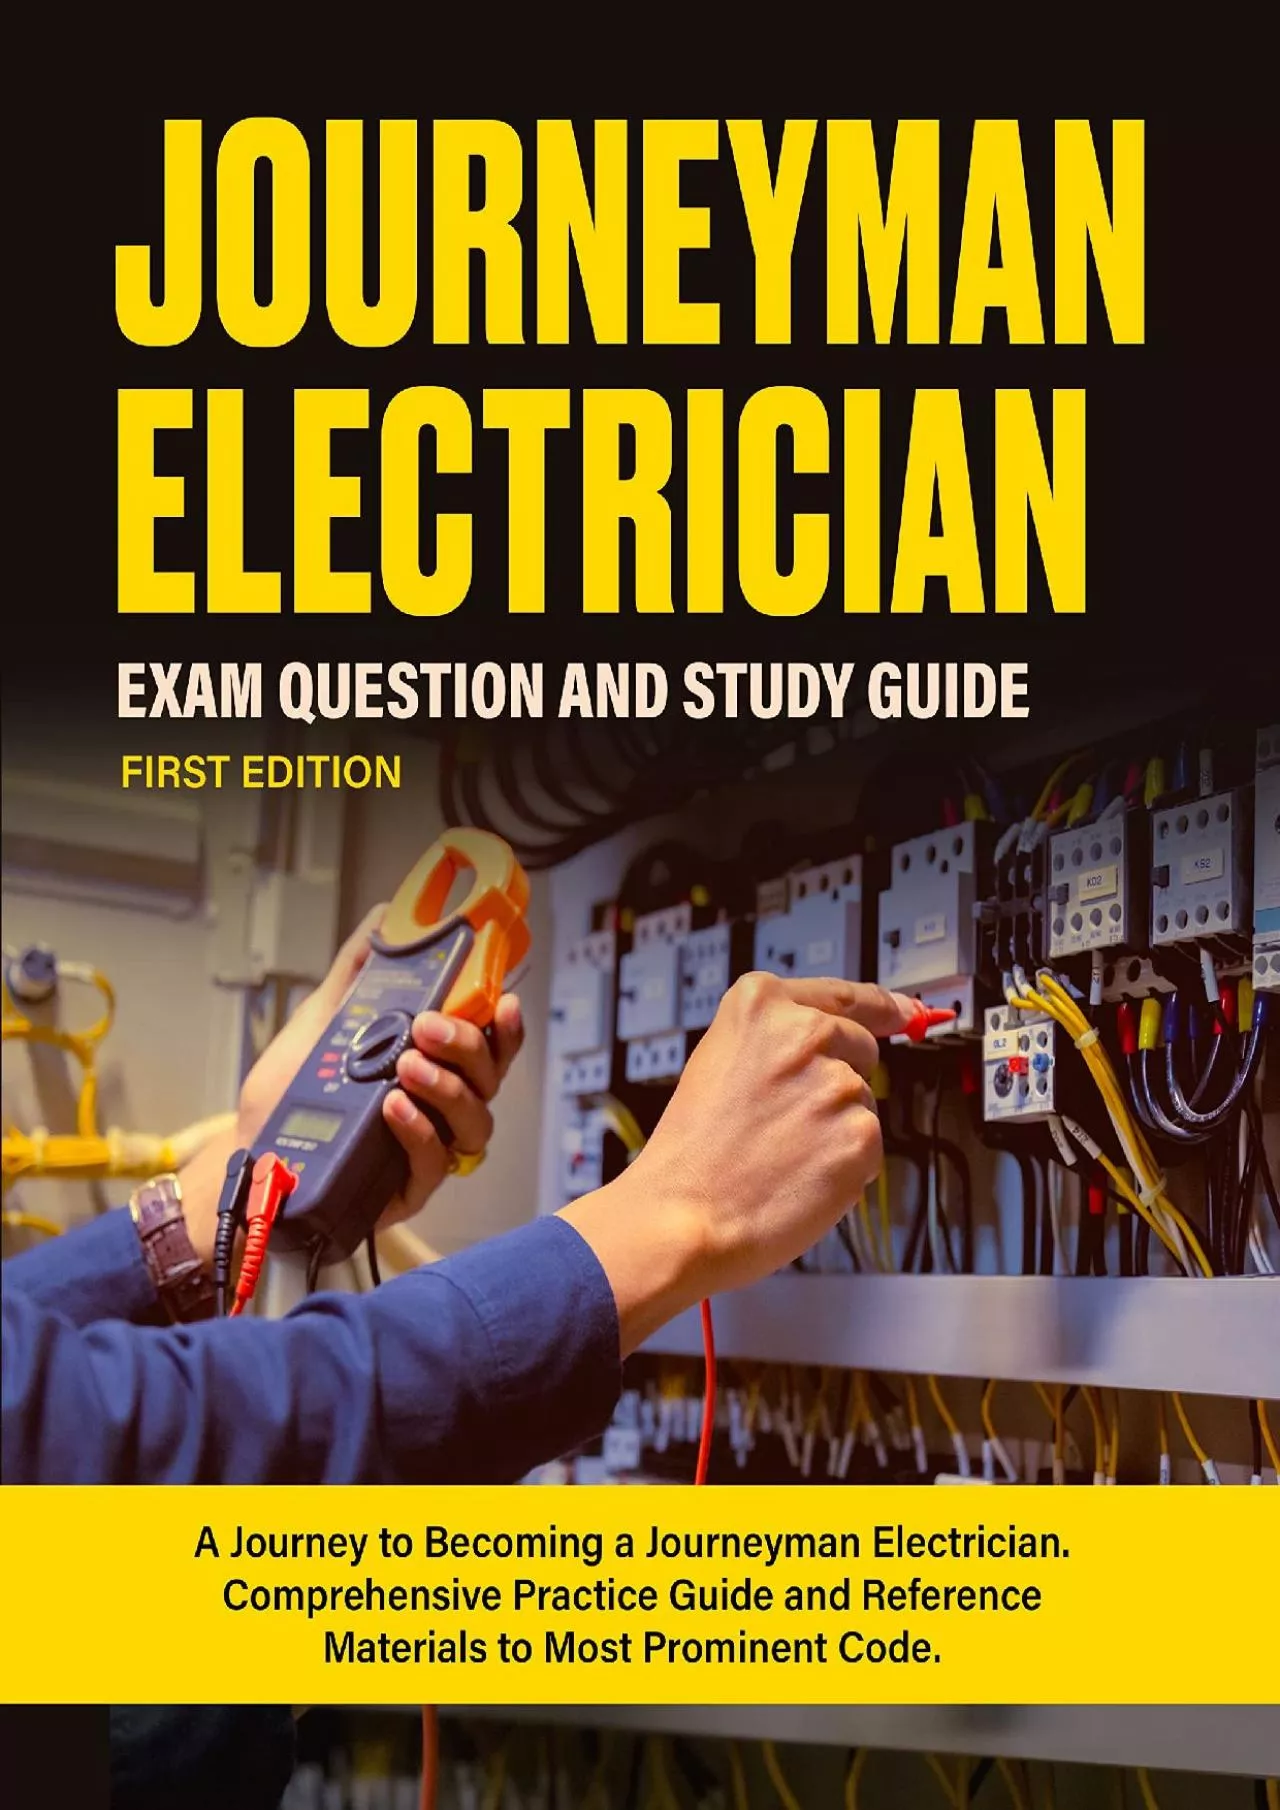 [READ] JOURNEYMAN ELECTRICIAN Exam Question and Study Guide First Edition: A Journey to